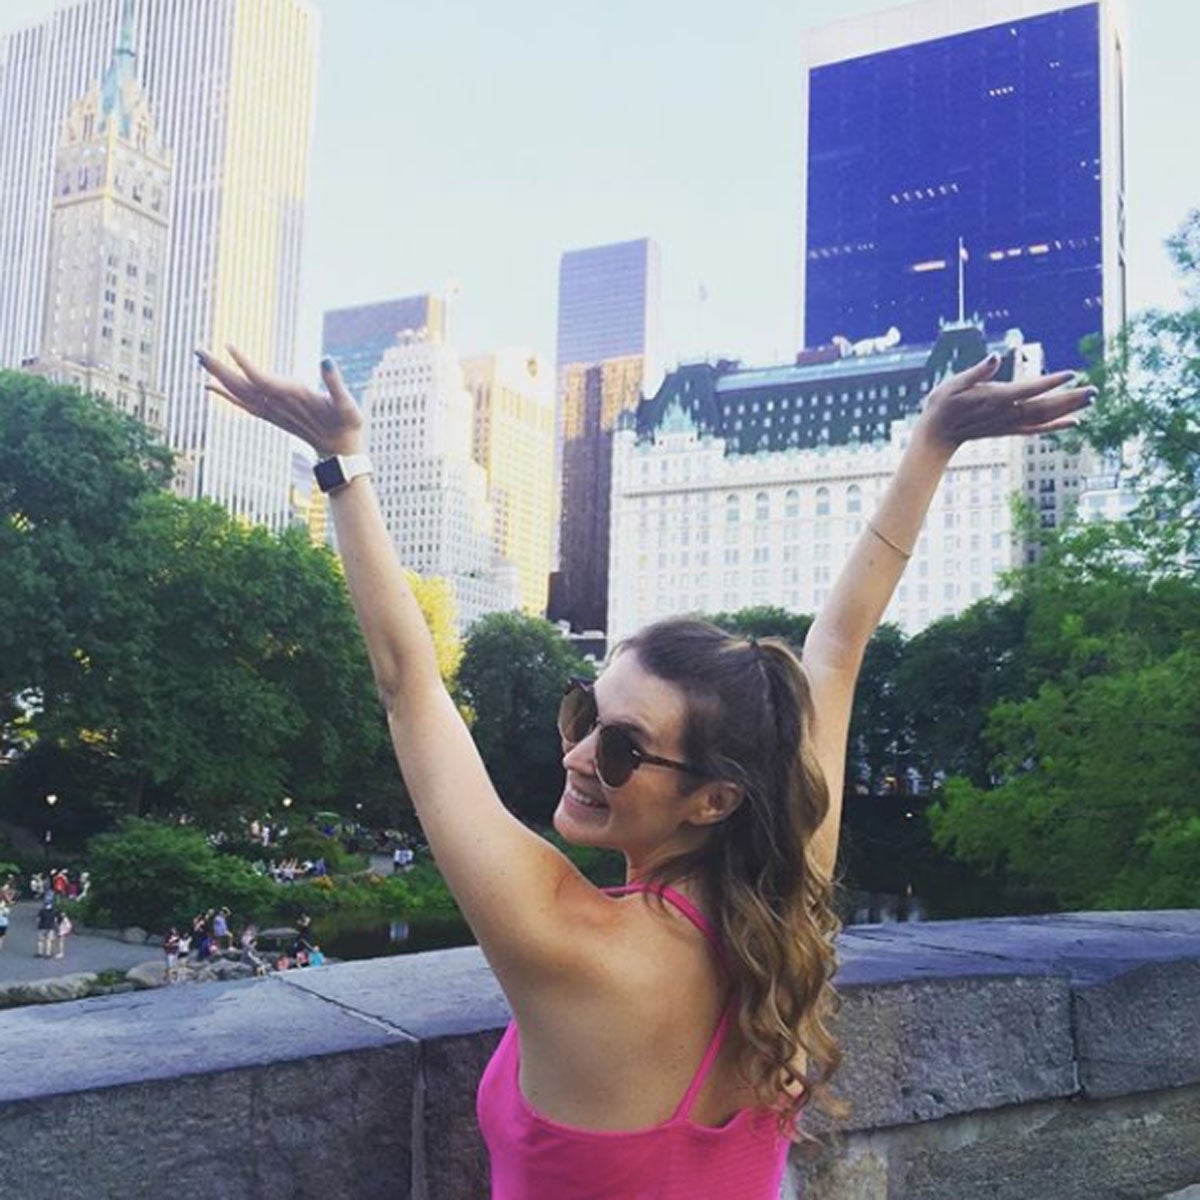  Woman in pink shirt with her back to camera smiles over her shoulder with New York City skyscrapers in the background